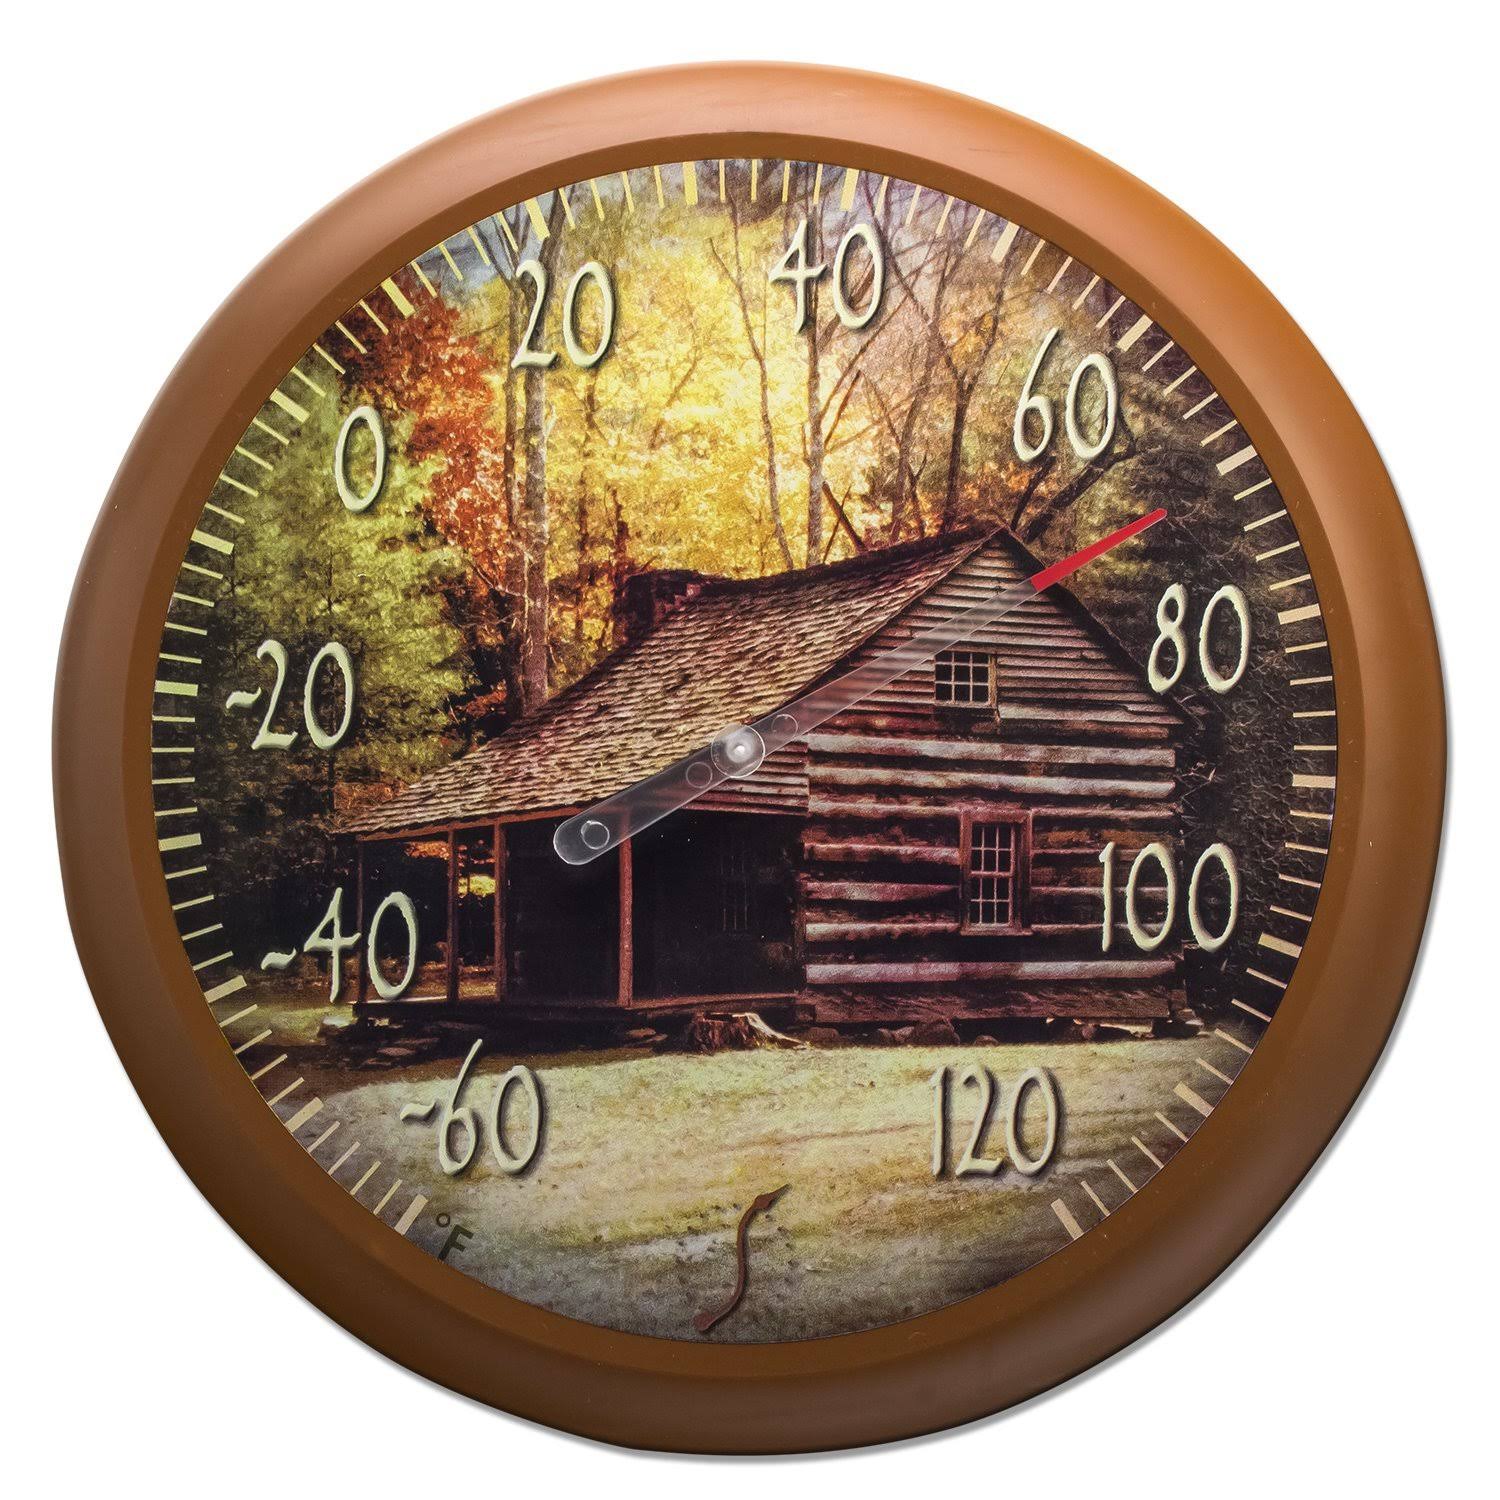 Taylor Precision Springfield Lodge Dial Indoor Outdoor Thermometer - 13.25"